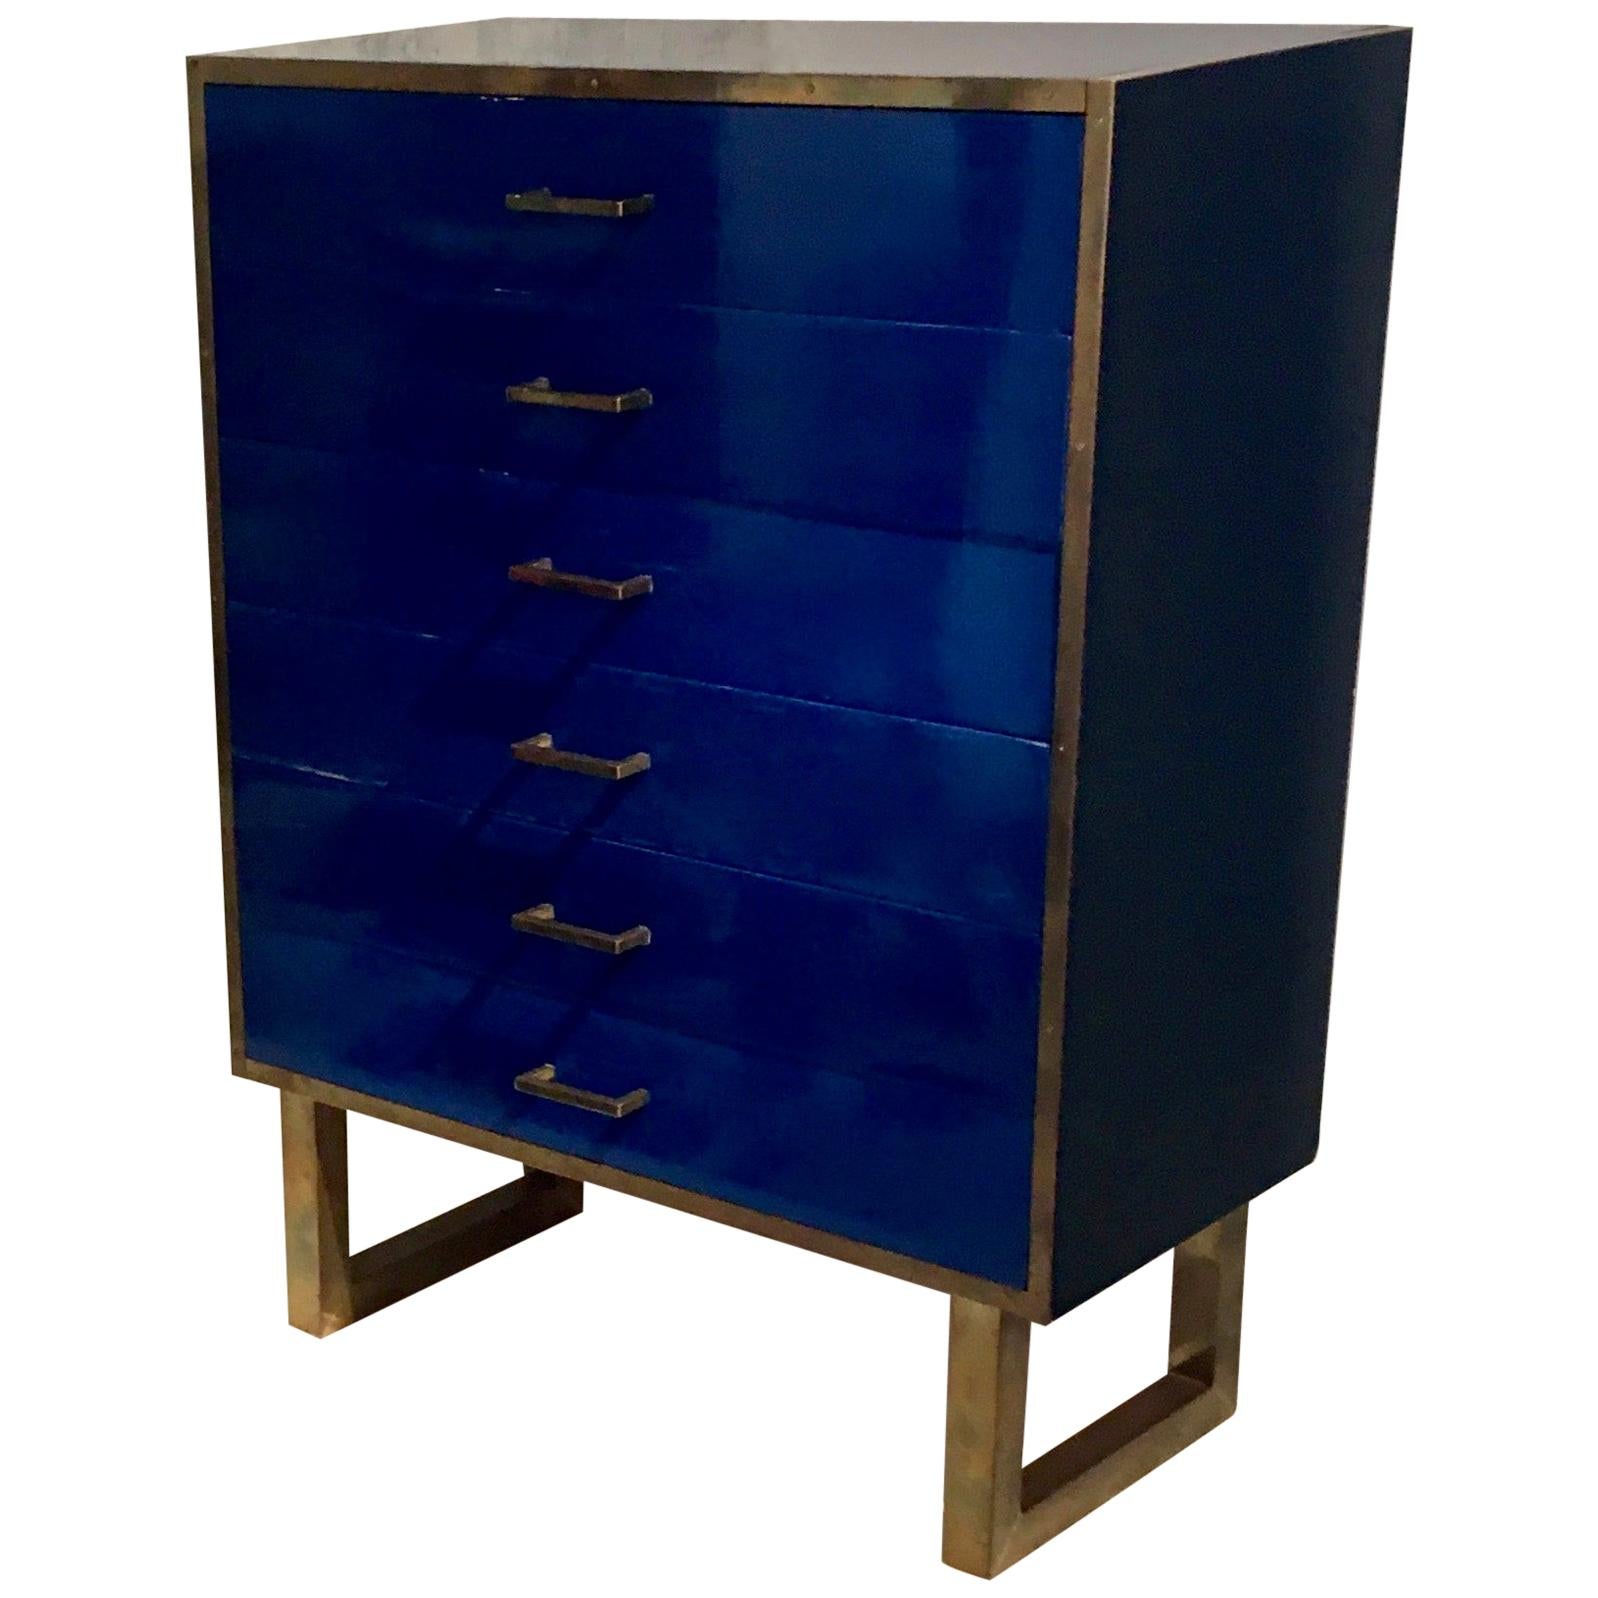 Lapis Lazuli and Black Lacquer Chest of Drawers by Jansen, France 1975